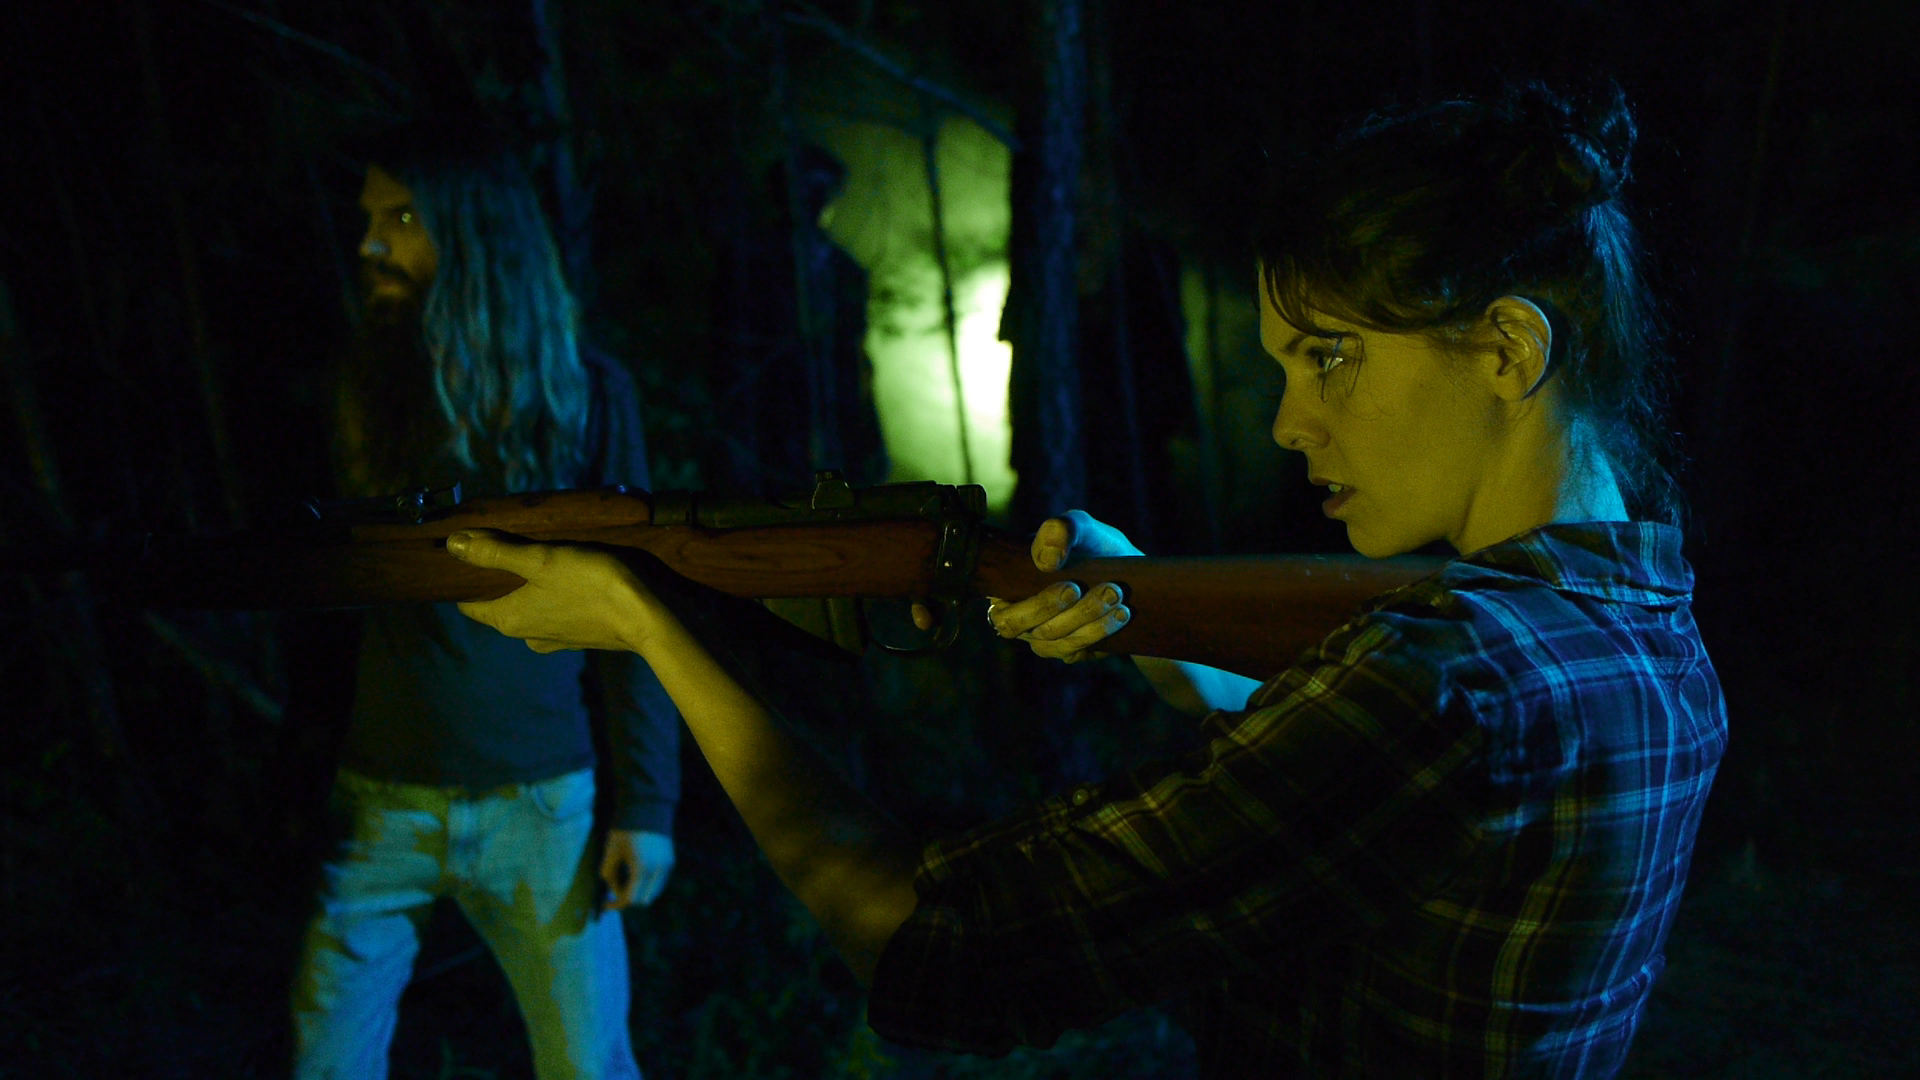 Still of Ashleigh Jo Sizemore and James Sizemore in The Demon's Rook